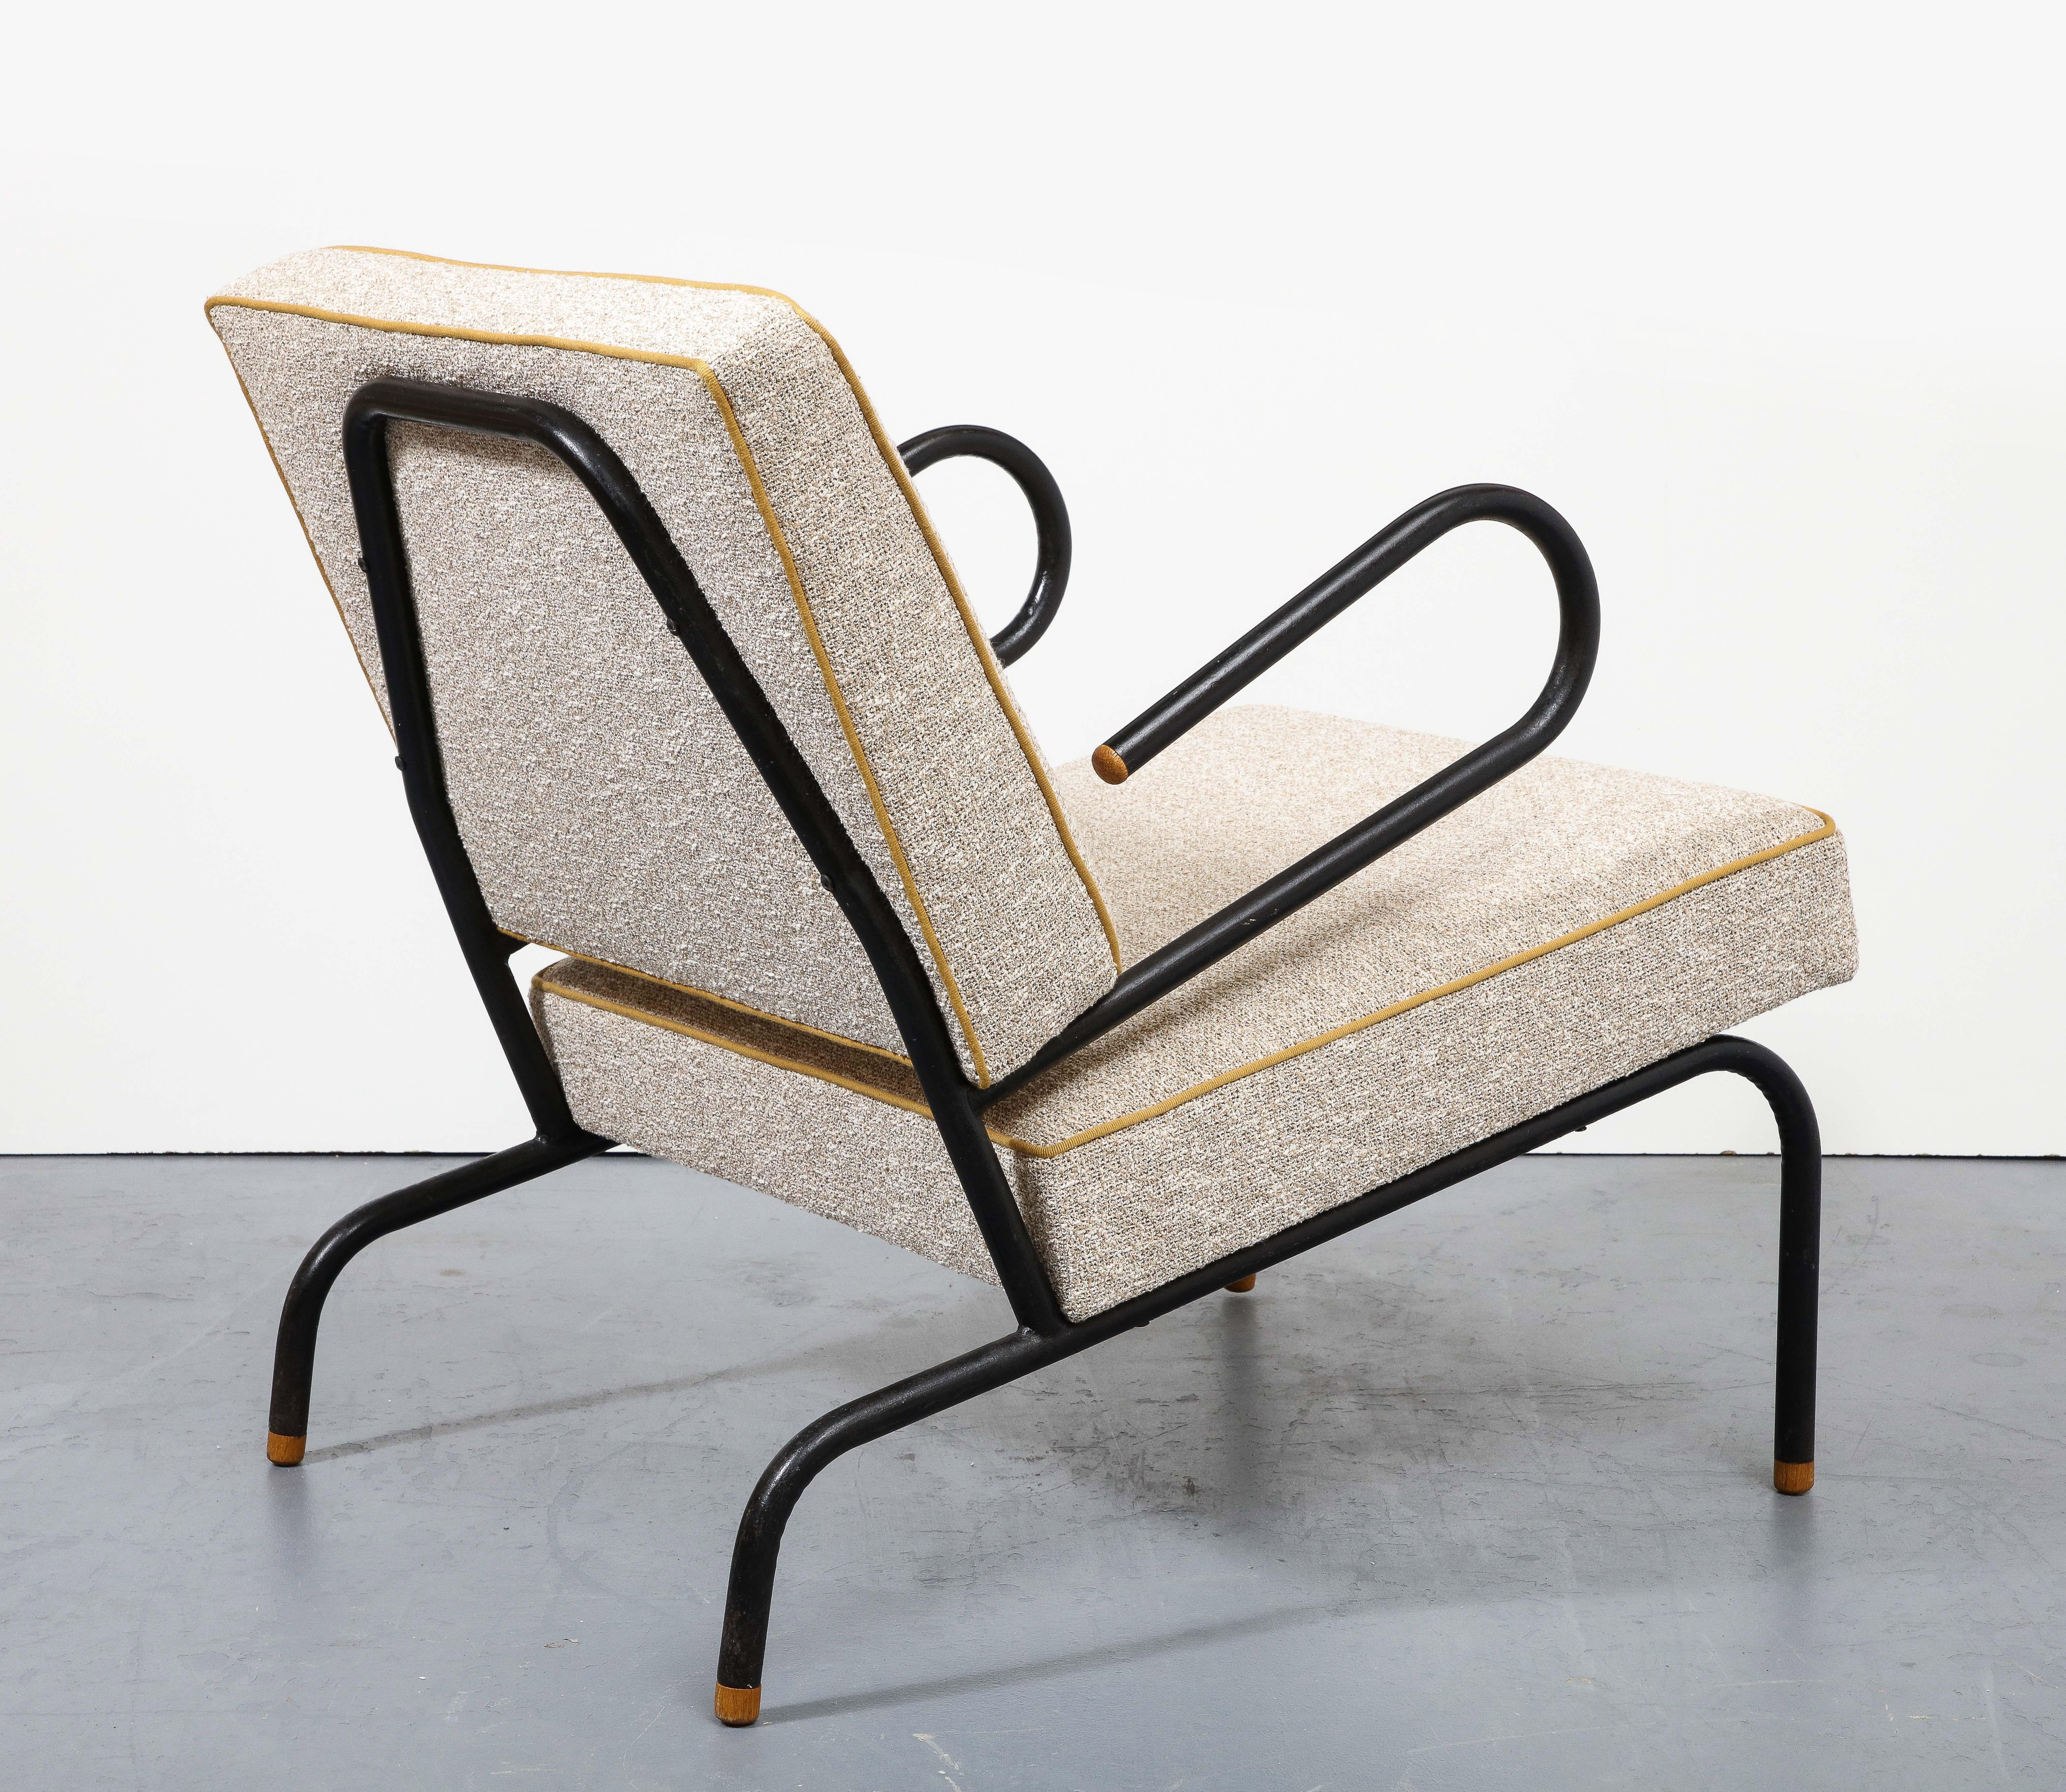 Bent Steel Lounge Chair by Jacques Hitier for Tubauto, France, c. 1955 For Sale 8